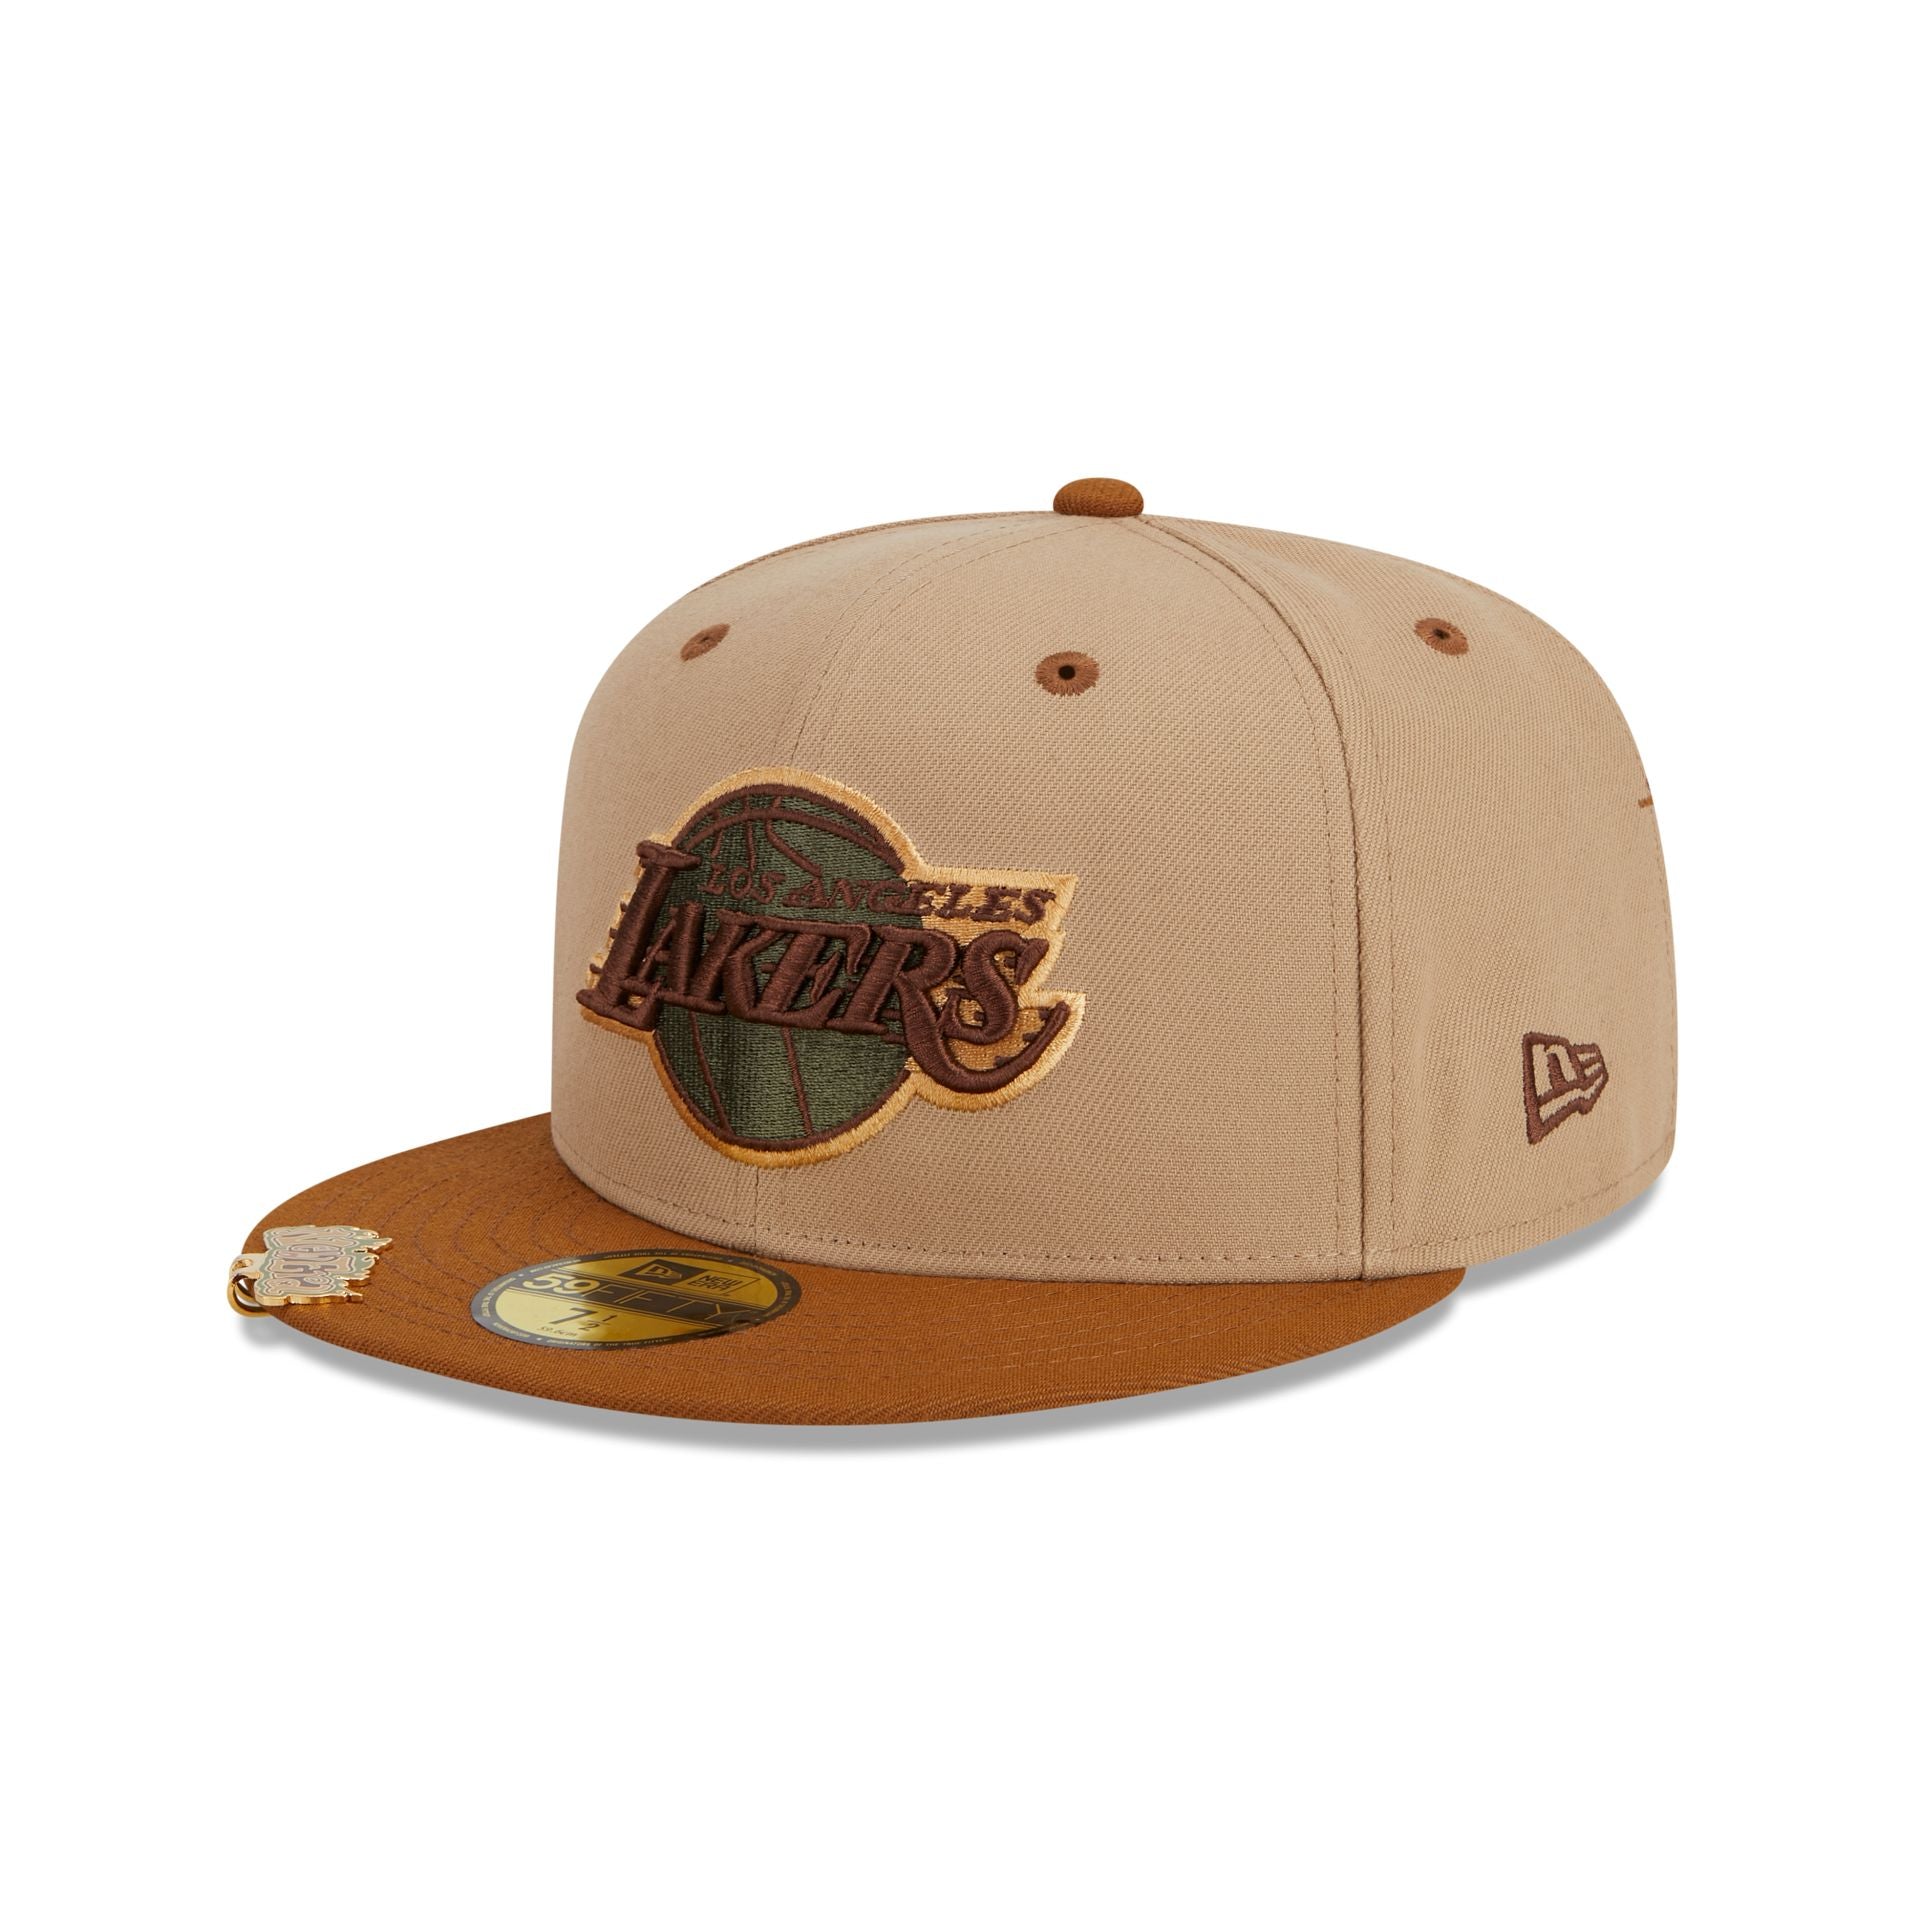 Los Angeles Lakers New Era Classic Edition 9FIFTY Cap - Unisex